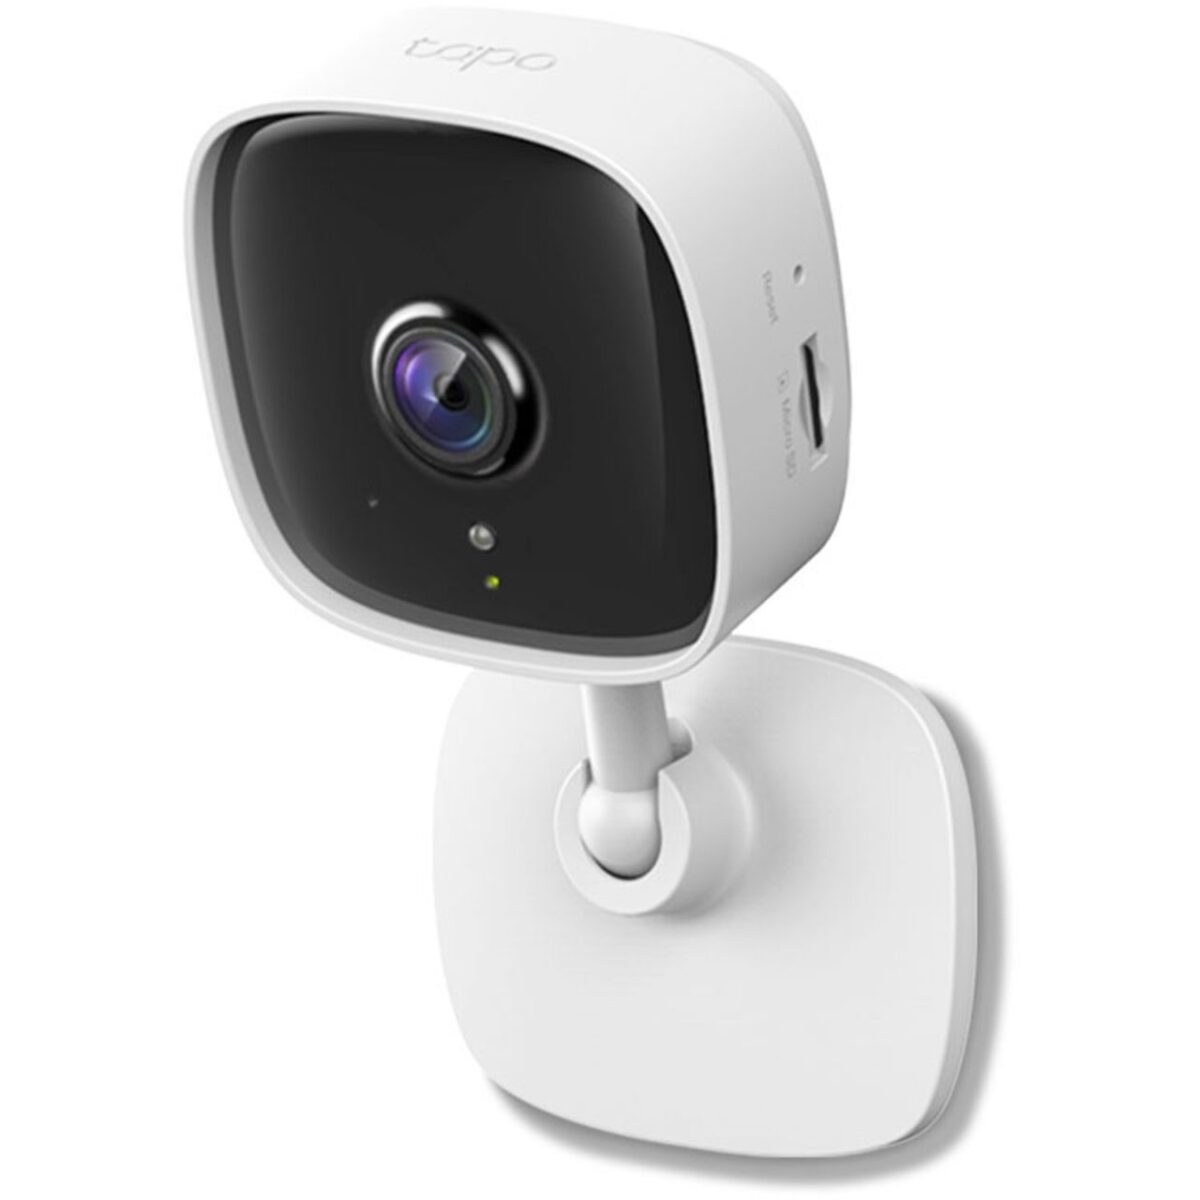 TP-Link Tapo C100 Home Security Wi-Fi Camera